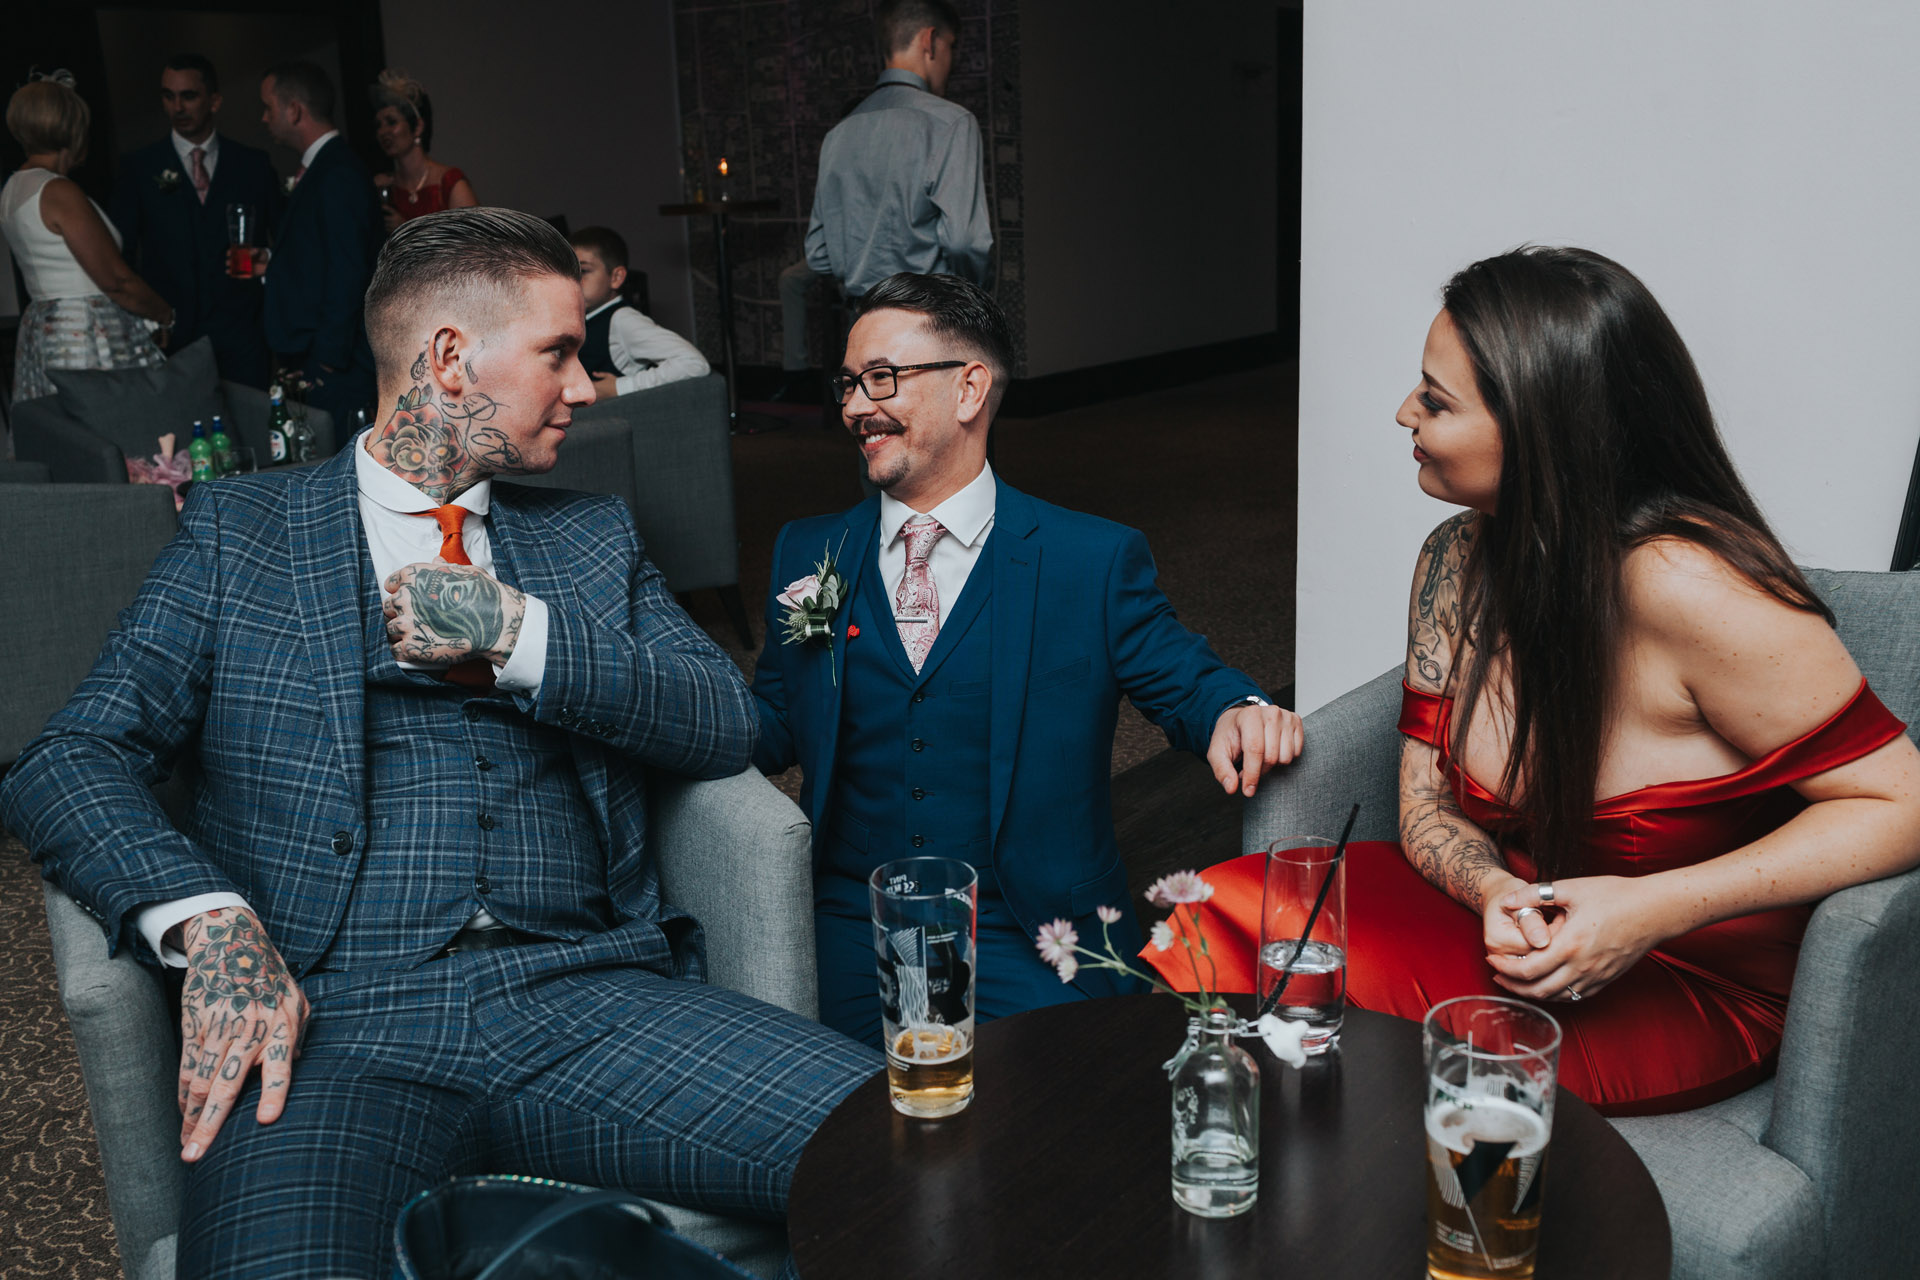 The groom laughs with friends.